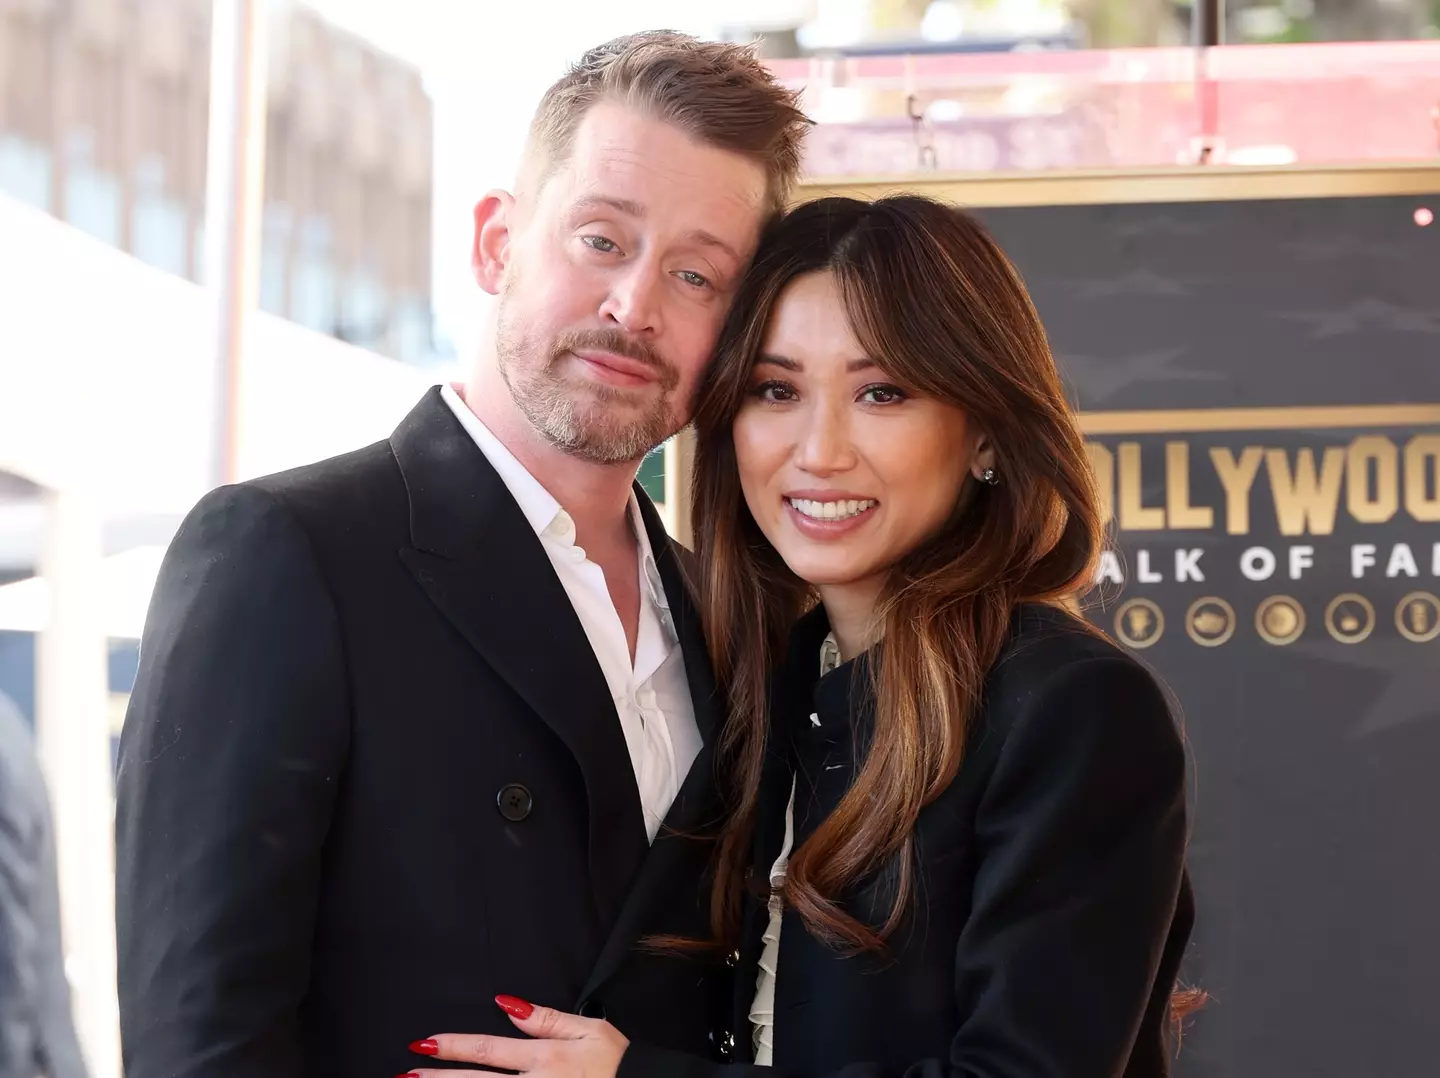 Culkin paid tribute to his wife Brenda Song as he got his Walk of Fame star in Hollywood.